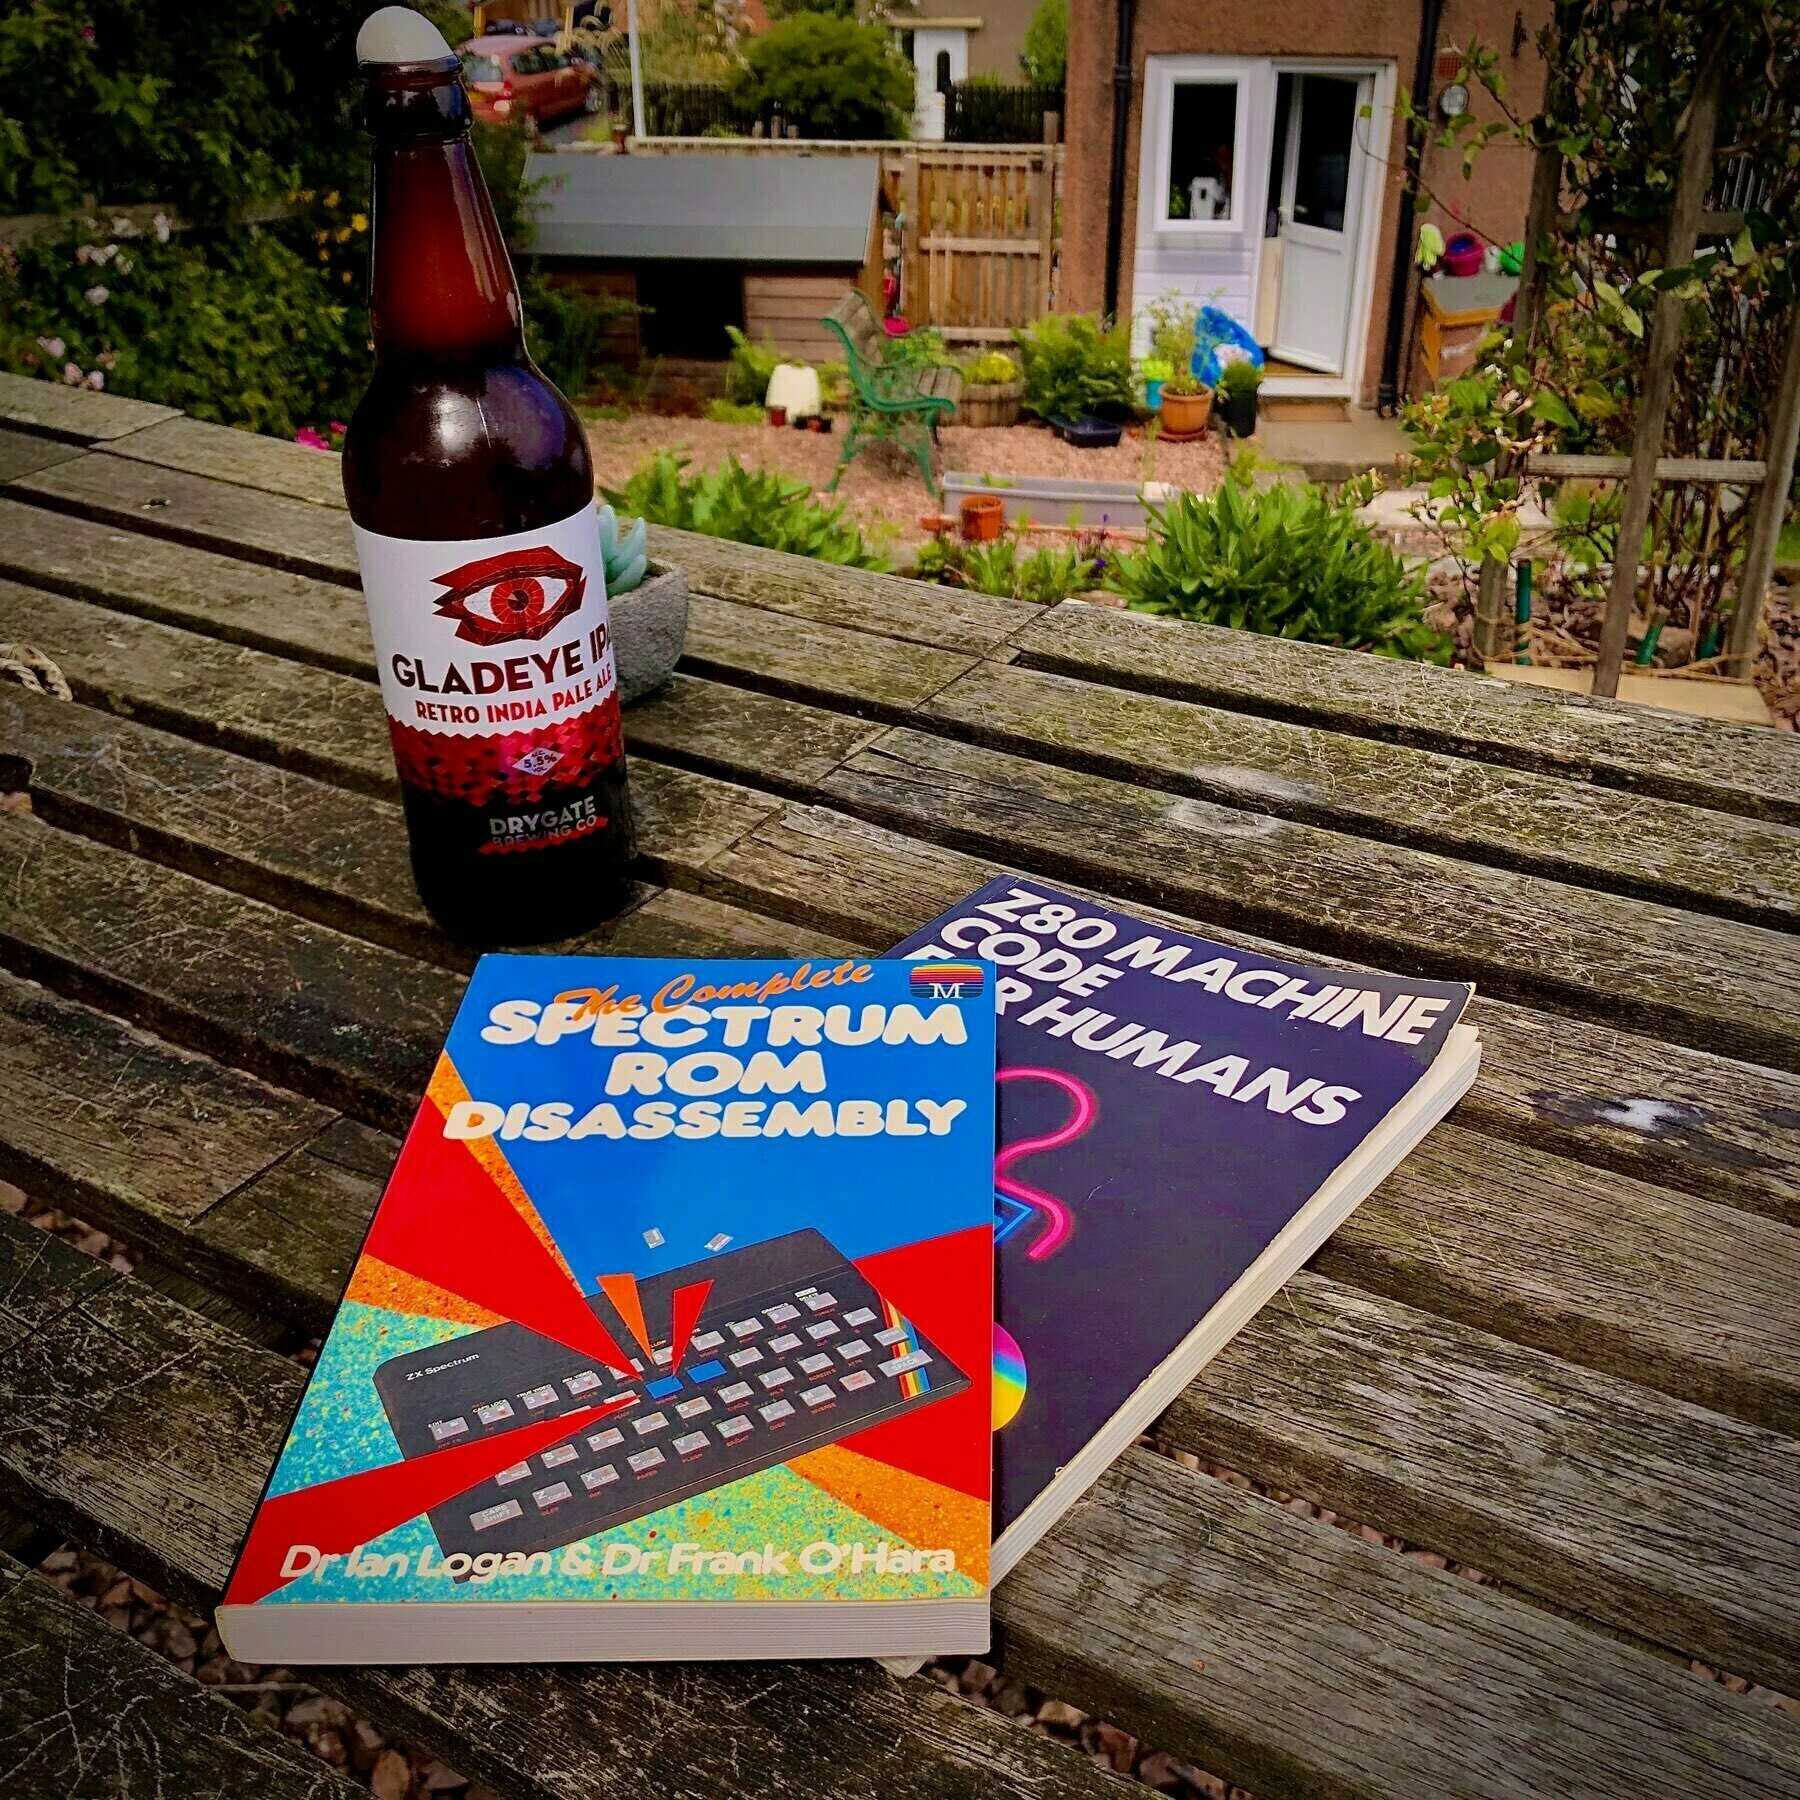 Bottle: Drygate Gladeye Retro IPA; Books: Z80 Machine Code for Humans, and The Complete Spectrum ROM Disassembly